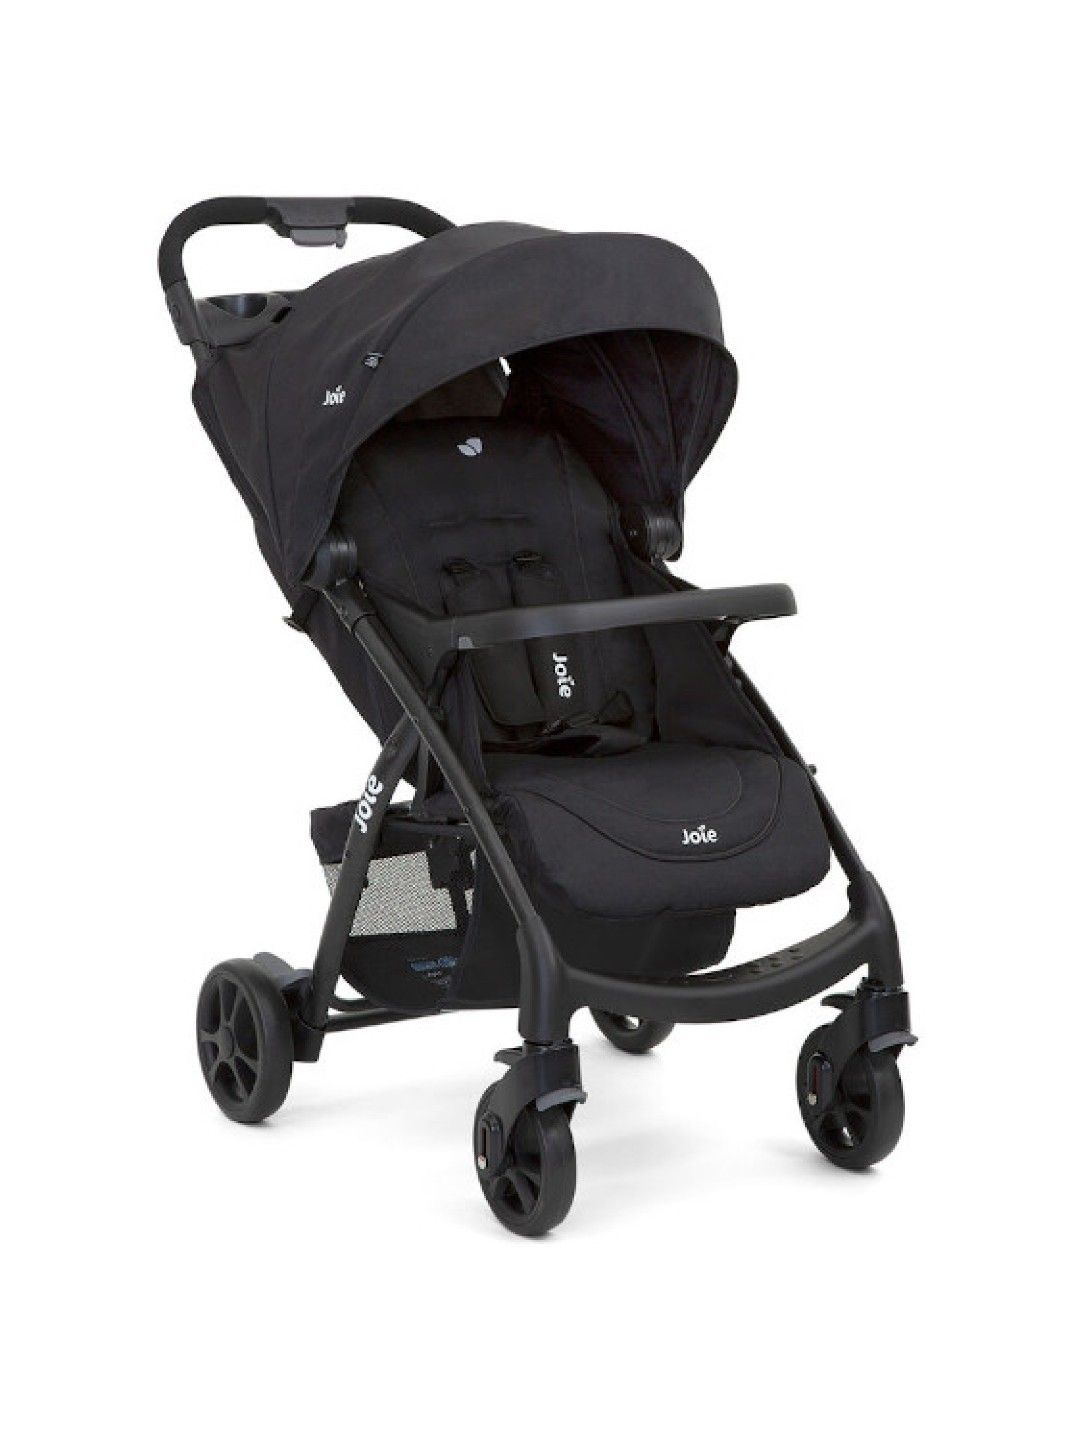 Joie Muze LX Travel System with Juva Car Seat (Coal- Image 3)